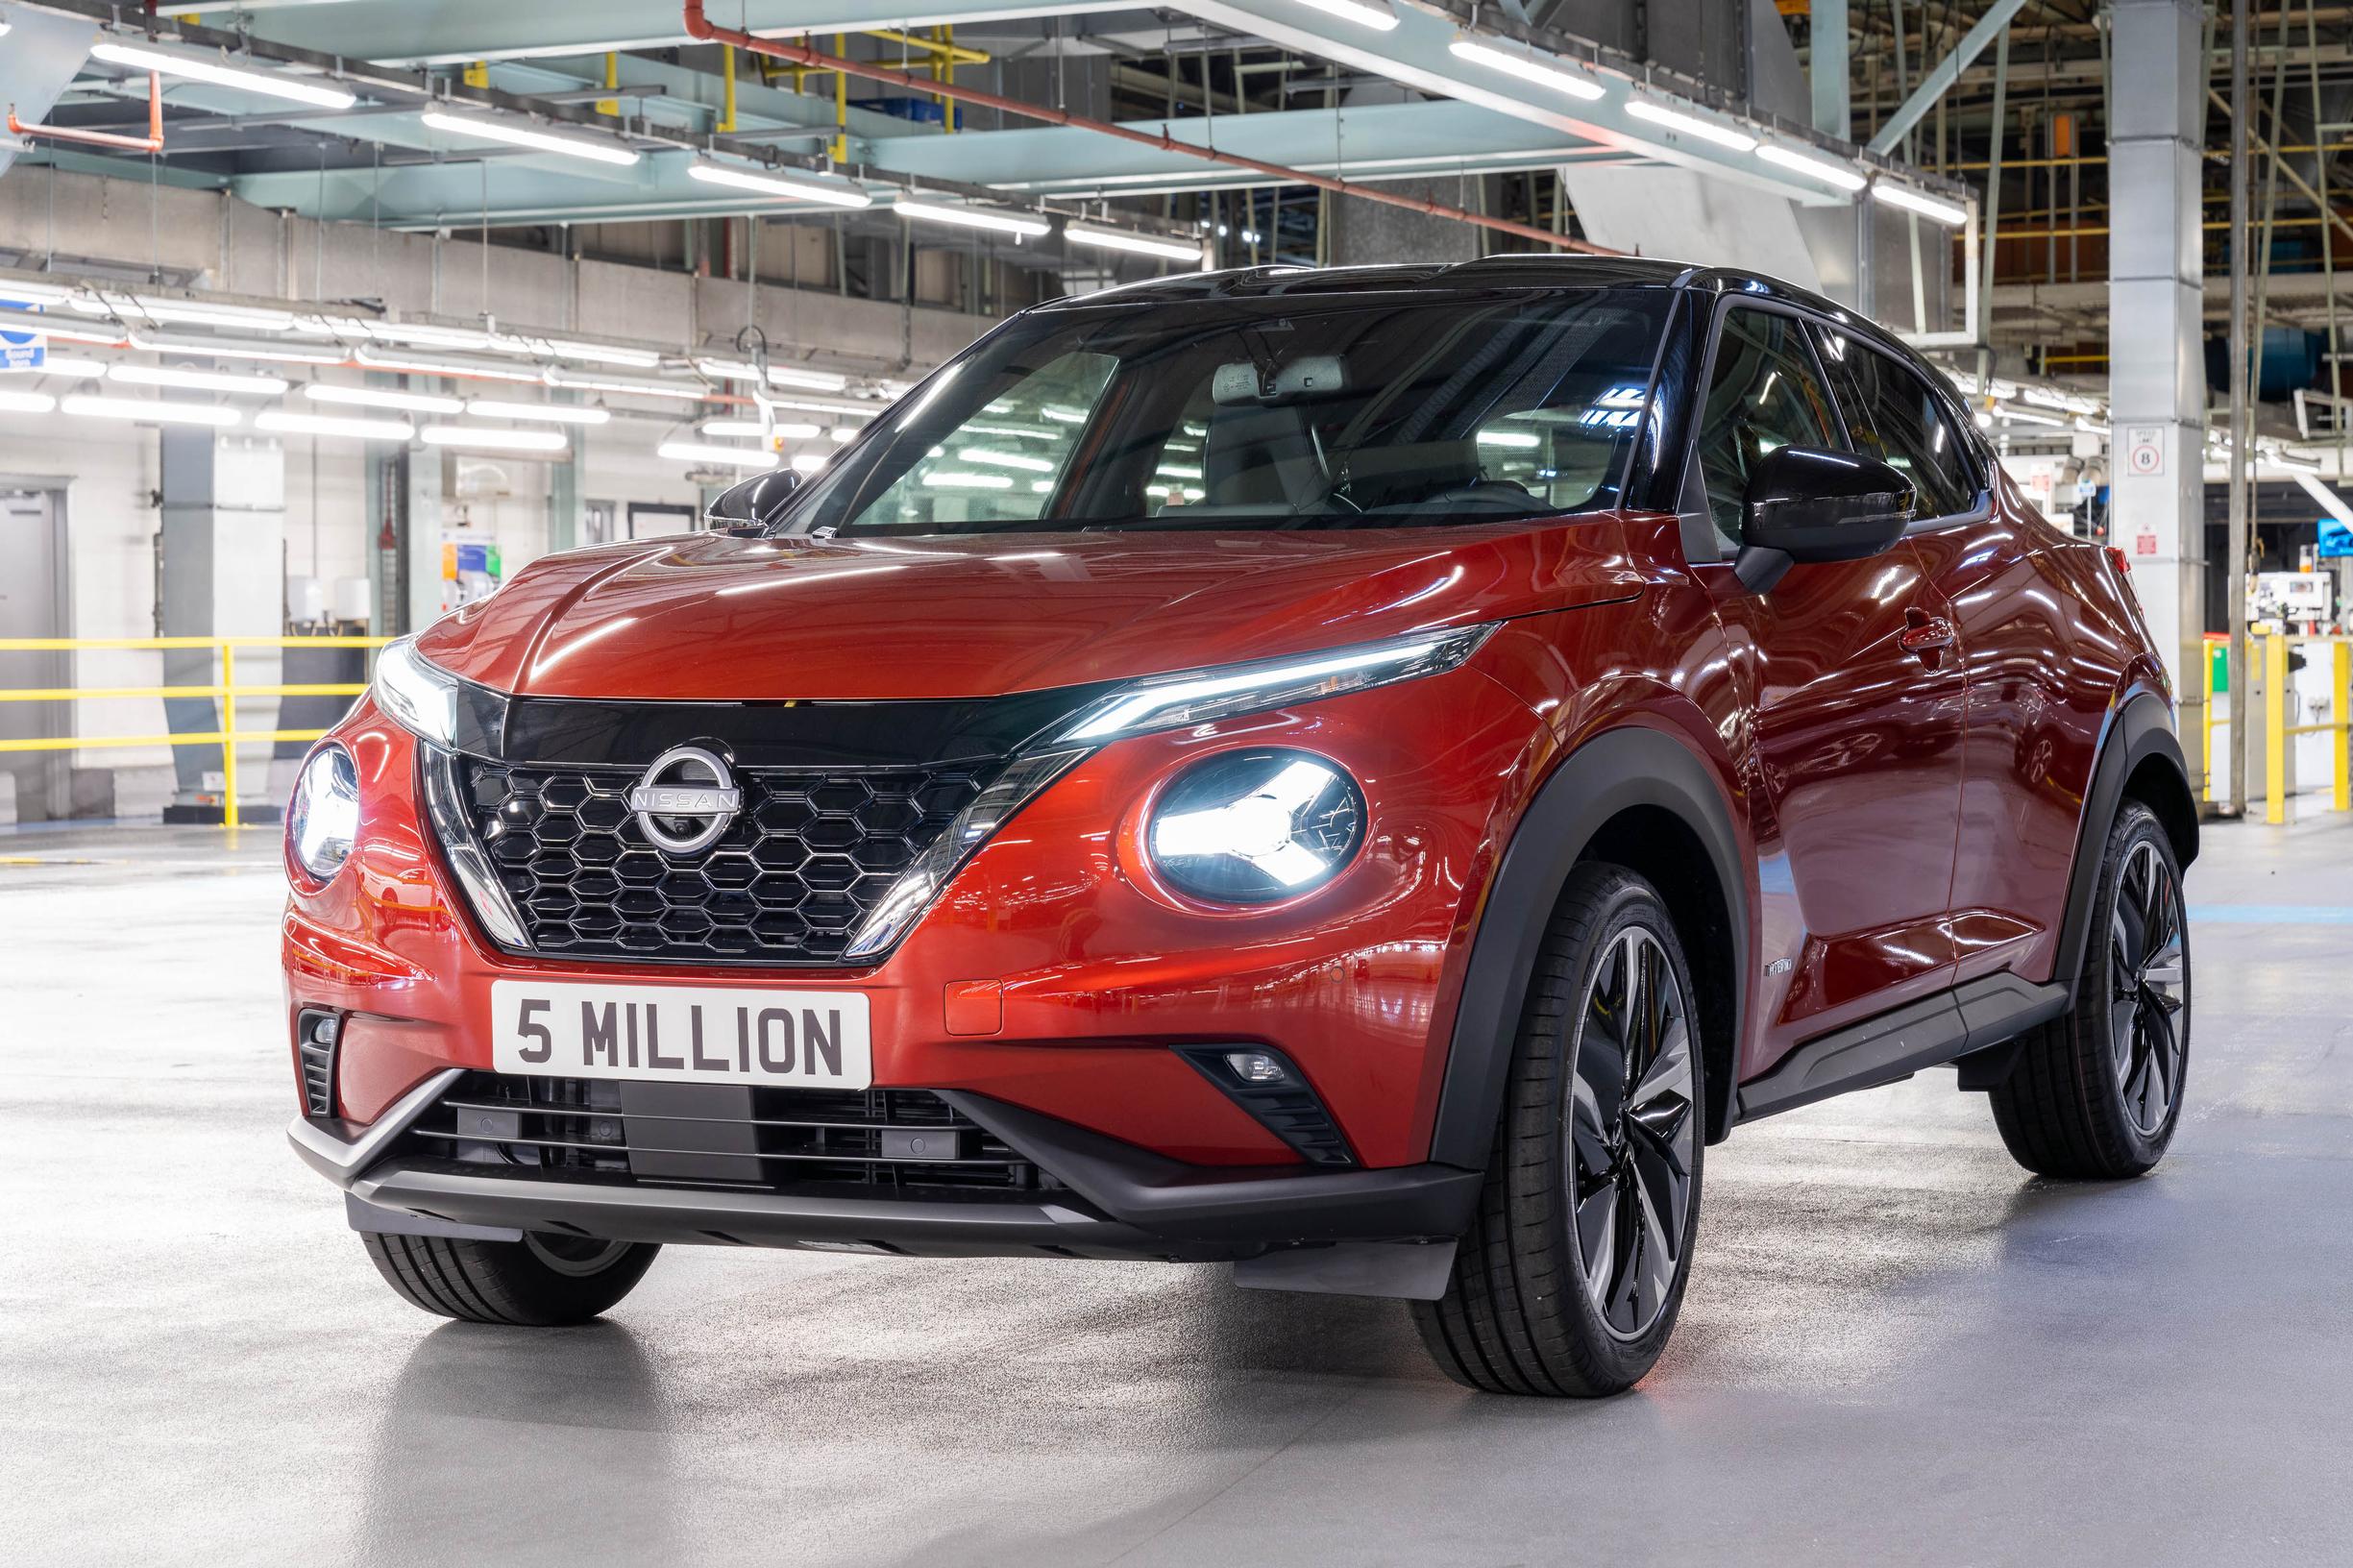 Zap-Map partners with Nissan Motor GB